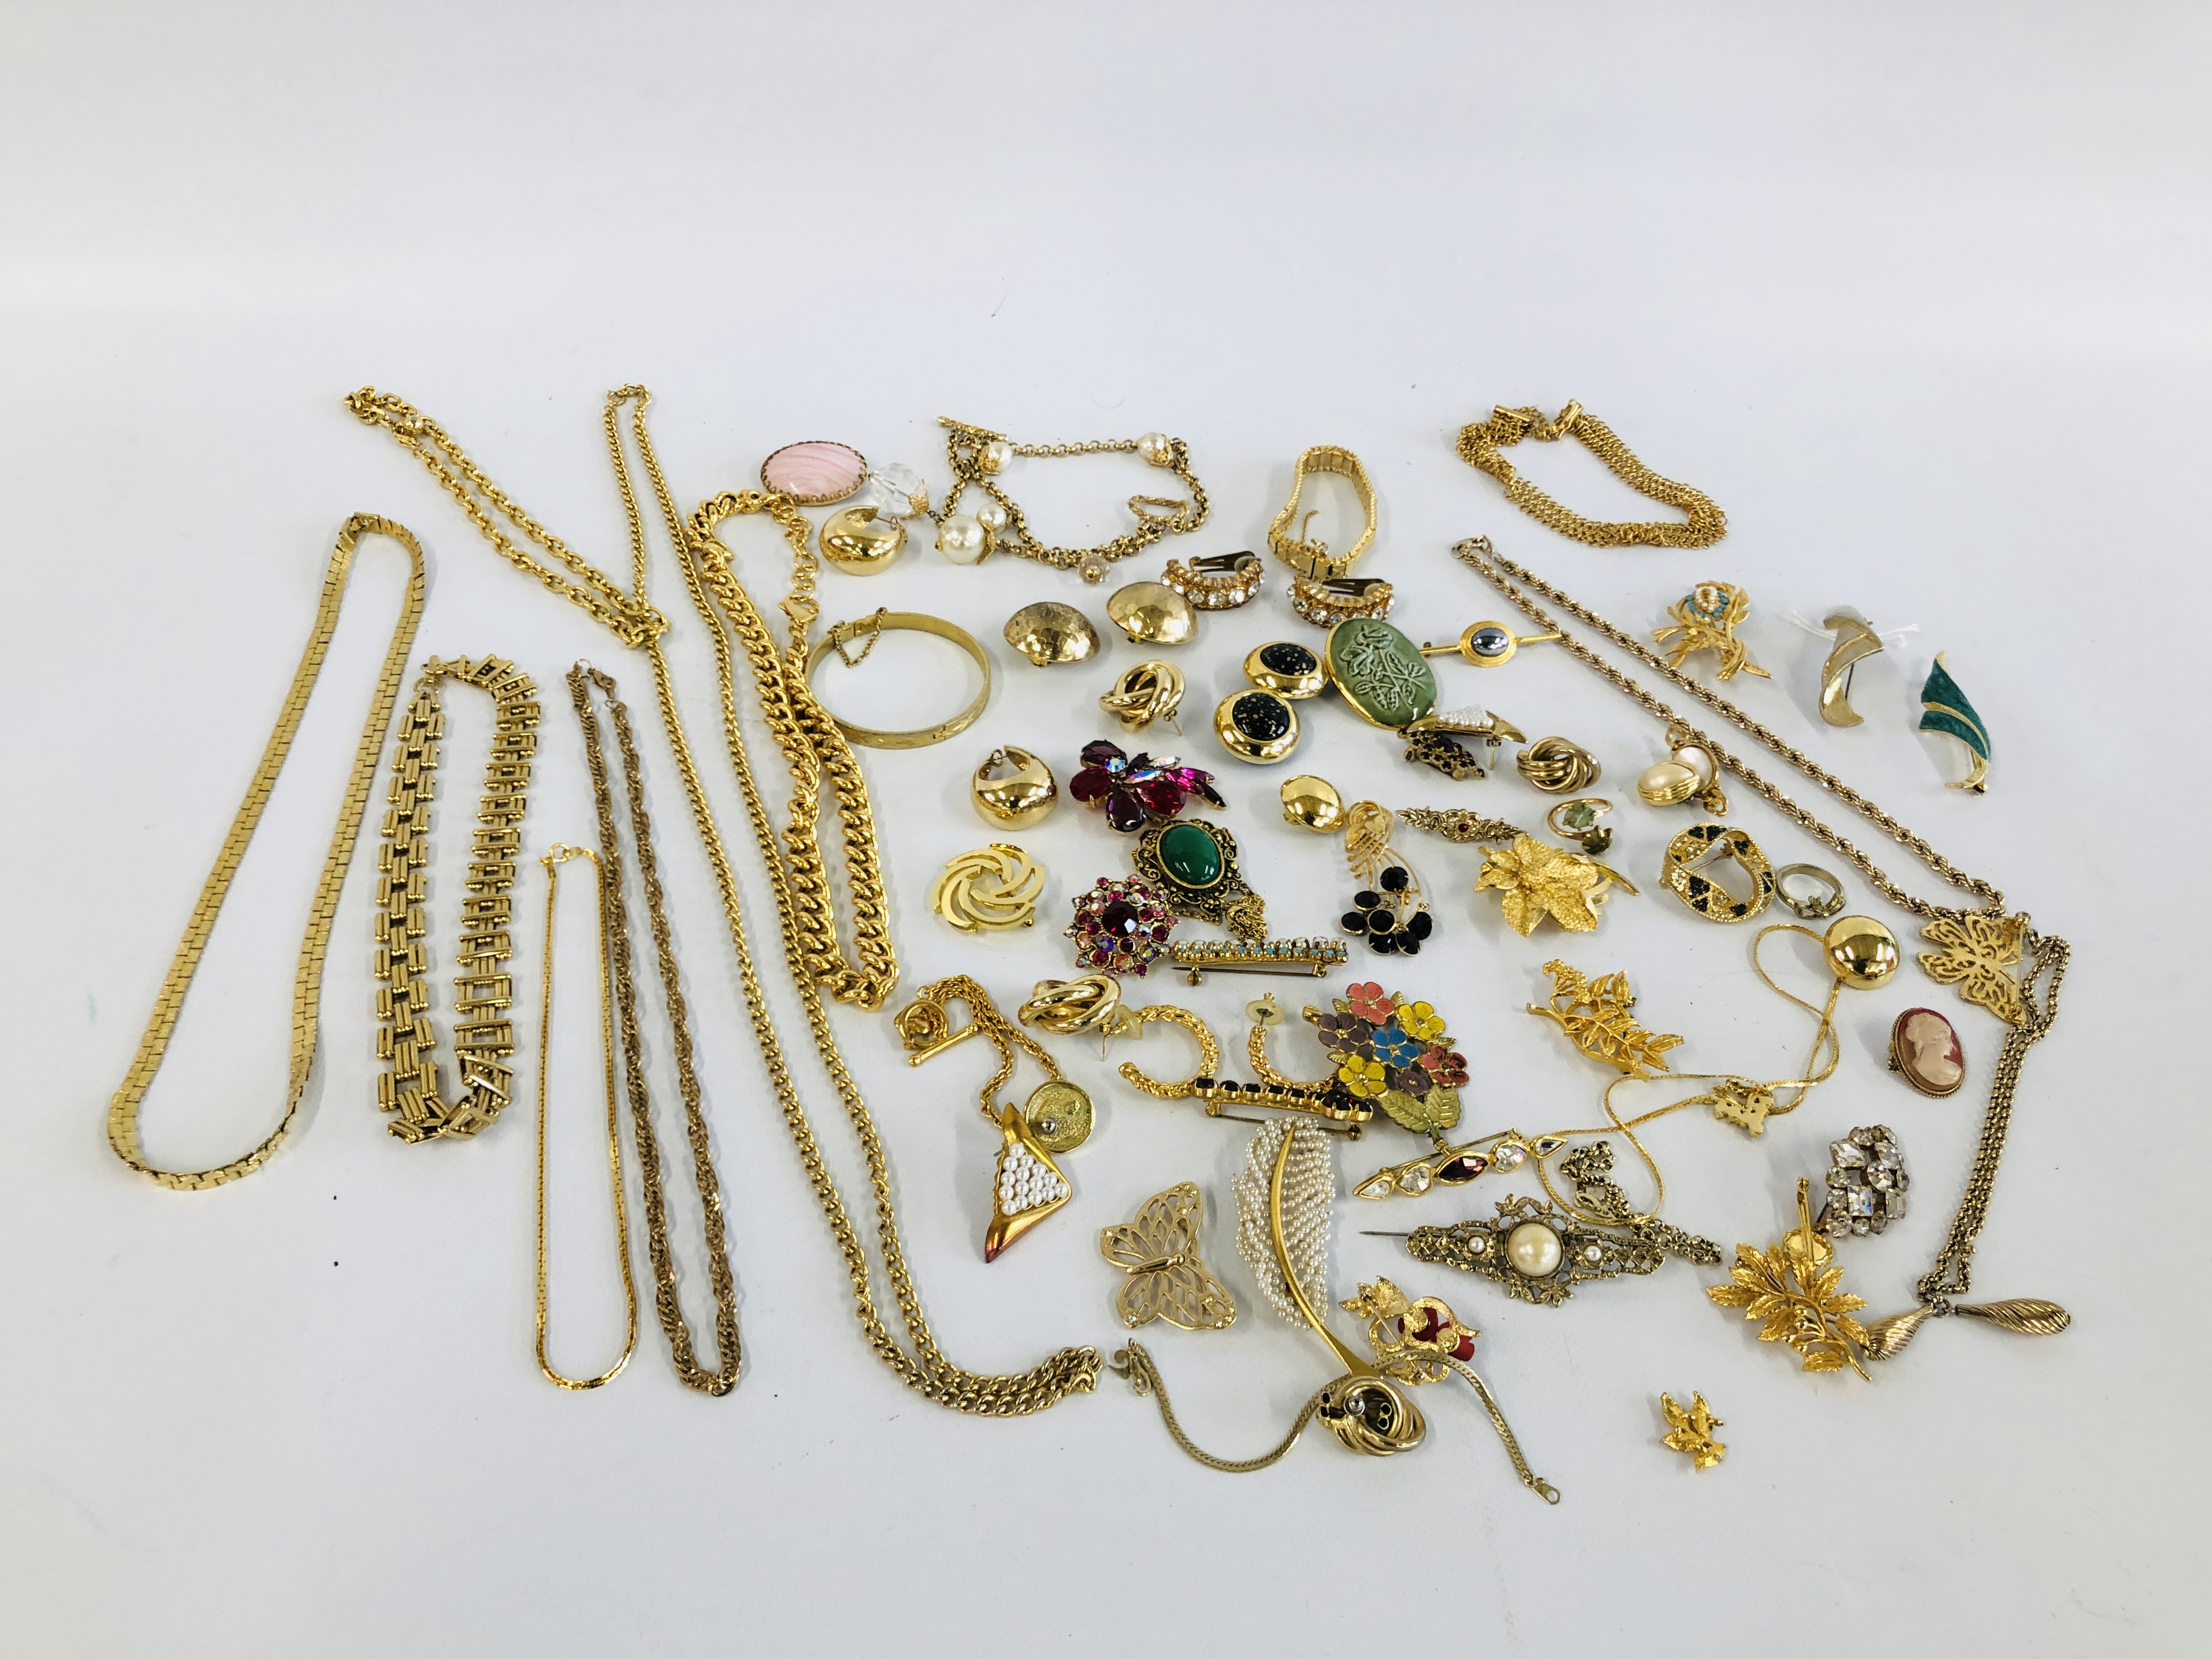 VINTAGE / RETRO AND MODERN GOLD TONE METAL NECKLACES, BRACELETS AND BROOCHES.